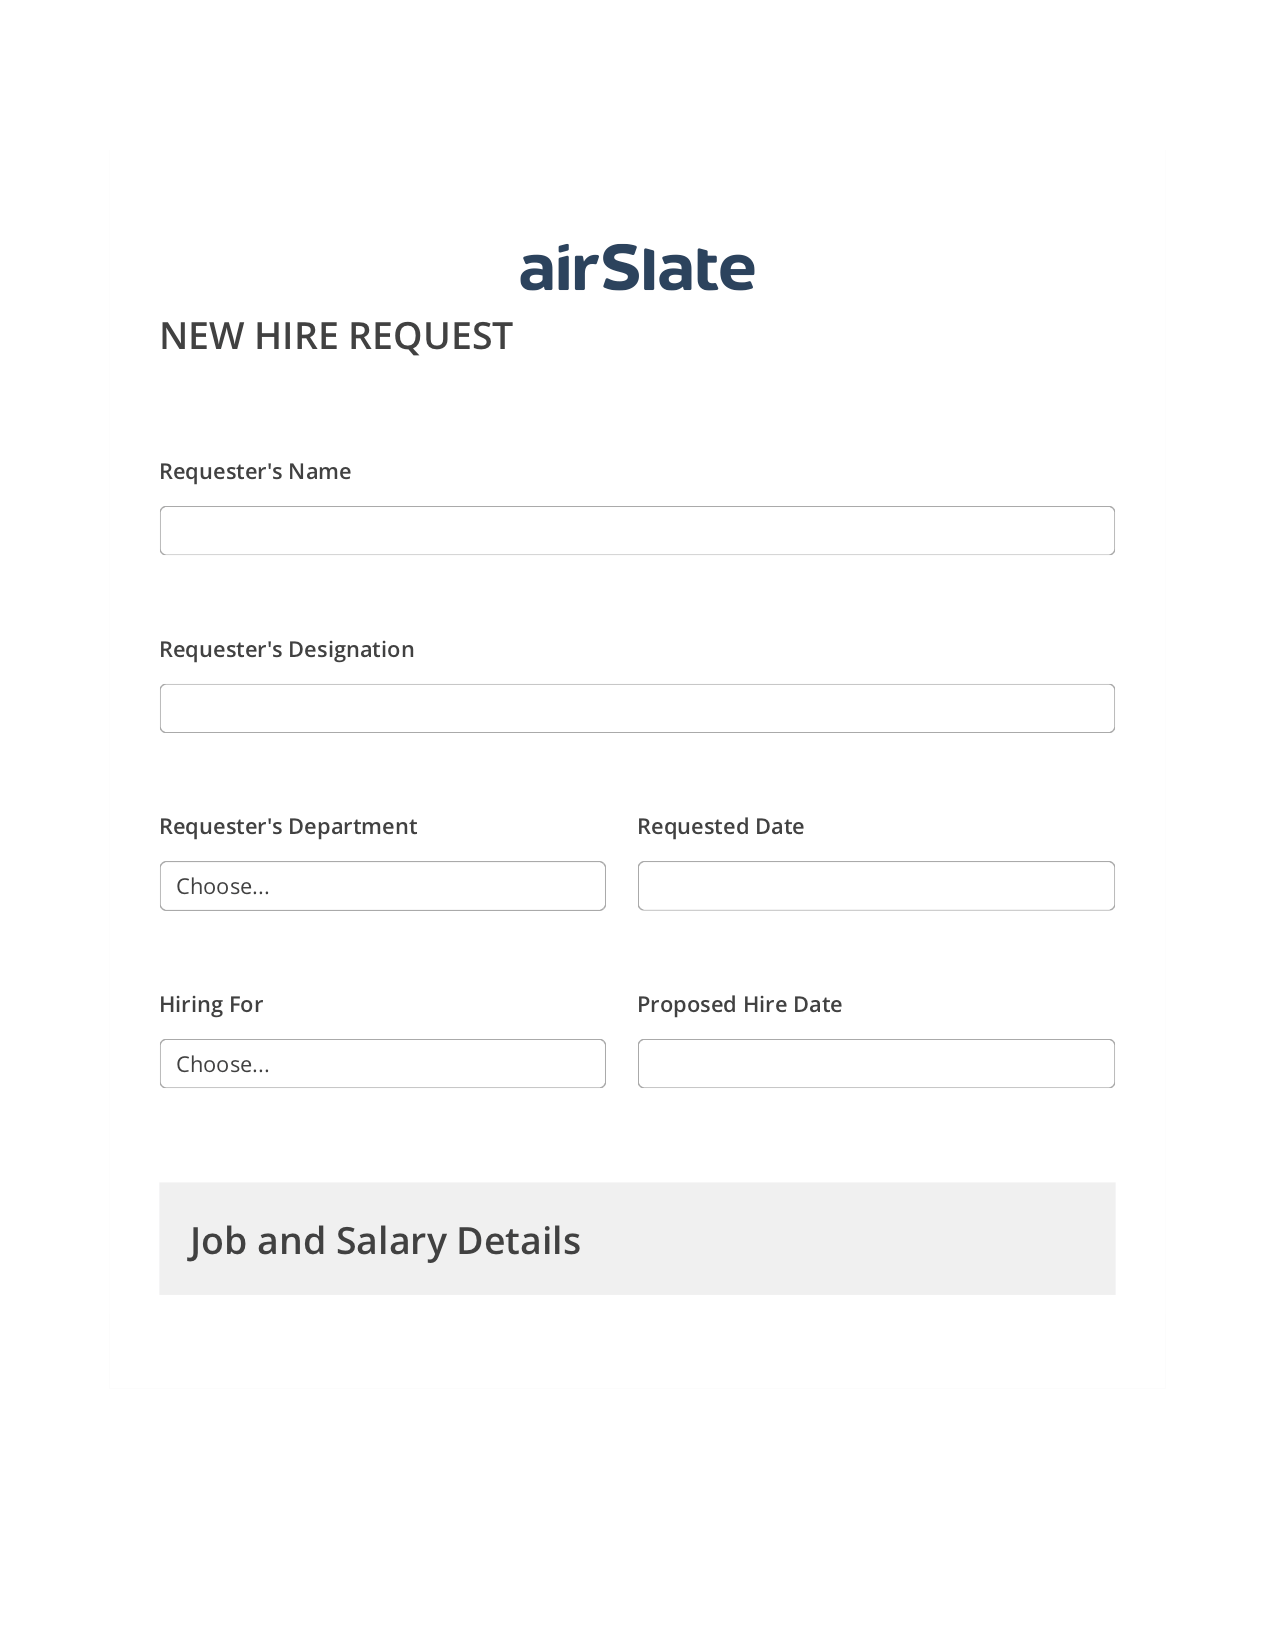 Hiring Request Workflow Prefill from NetSuite records, Send Mailchimp Campaign Bot, Export to NetSuite Bot